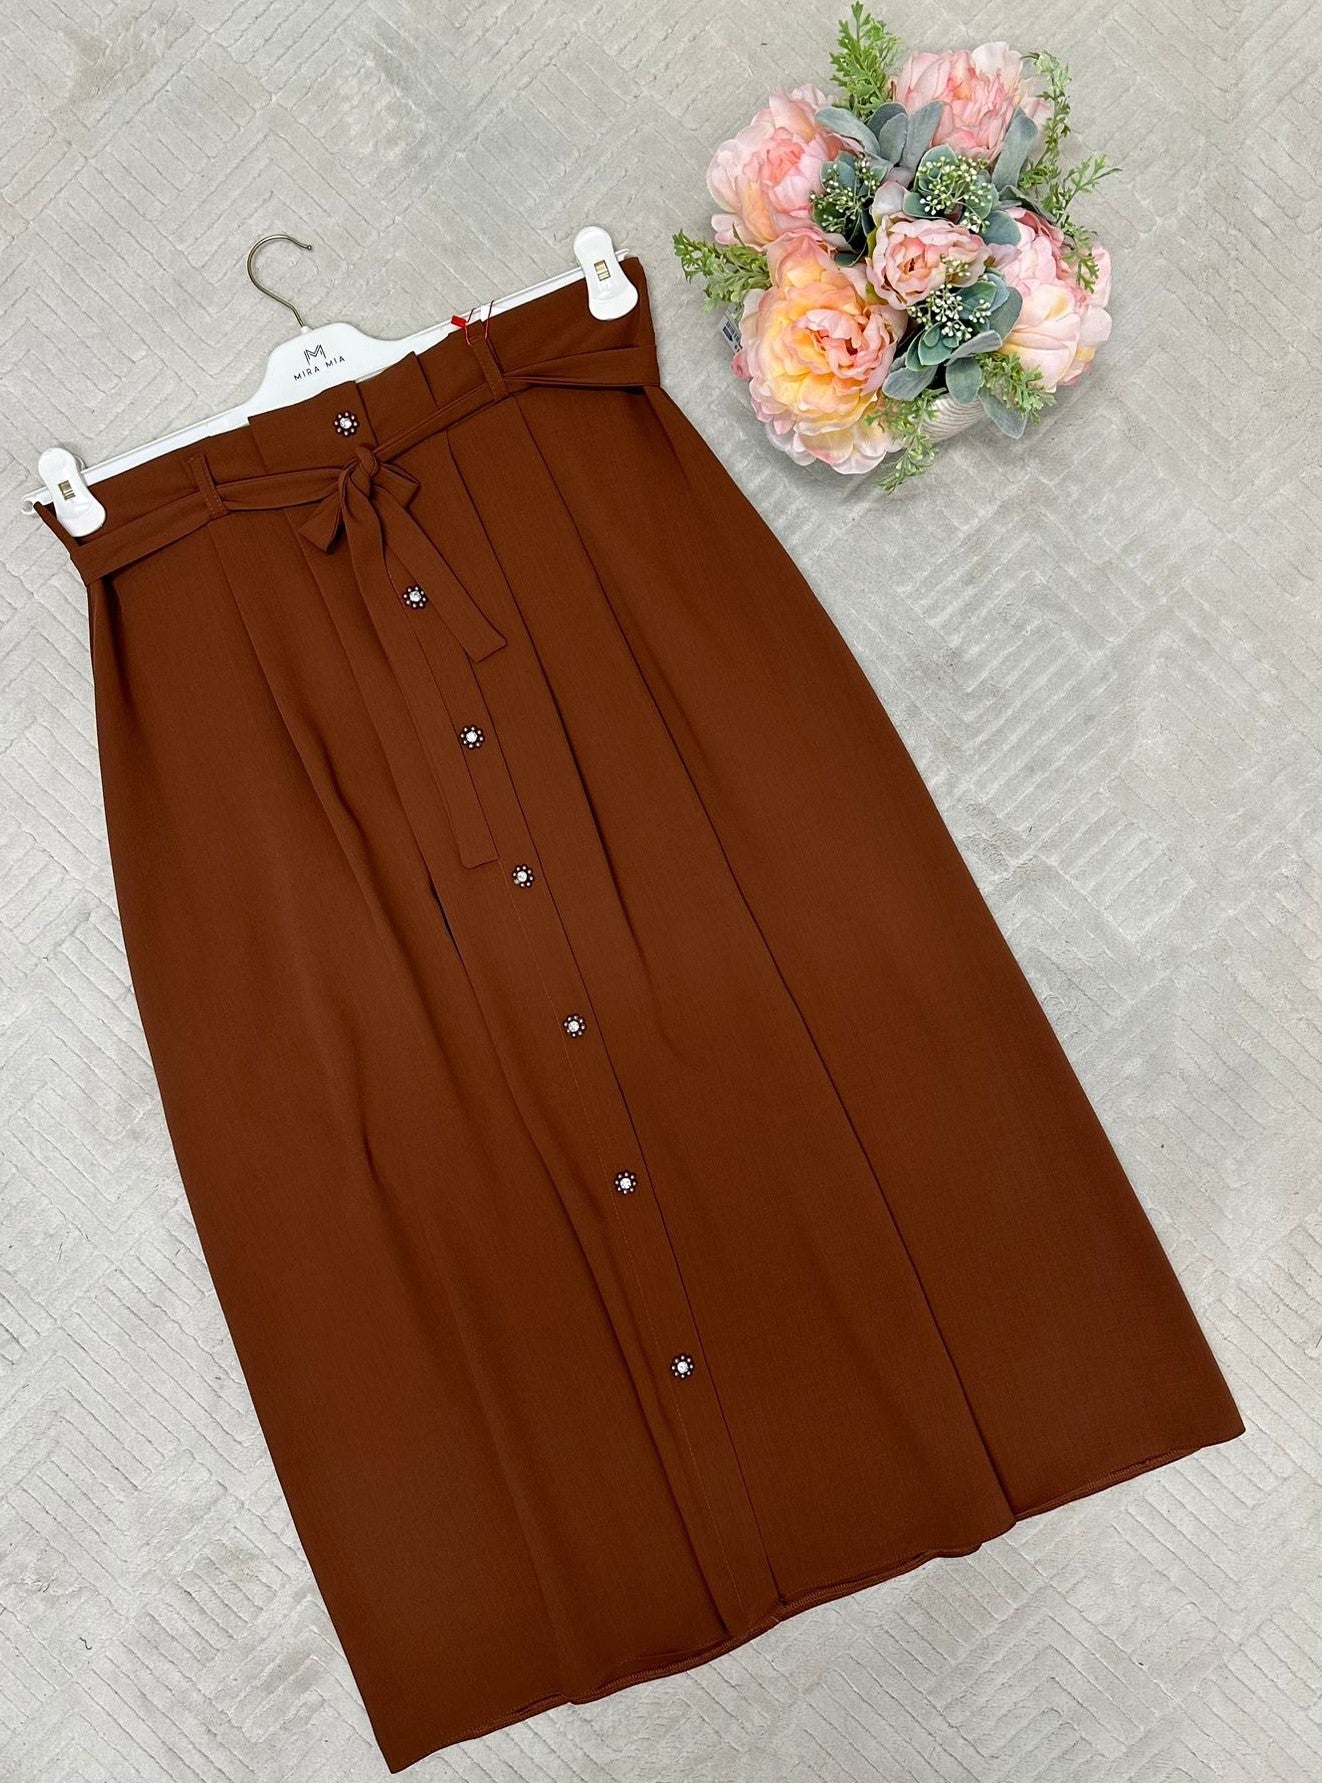 Simply pleated Wide Skirt with Belt (length 37 inch / 95 cm)